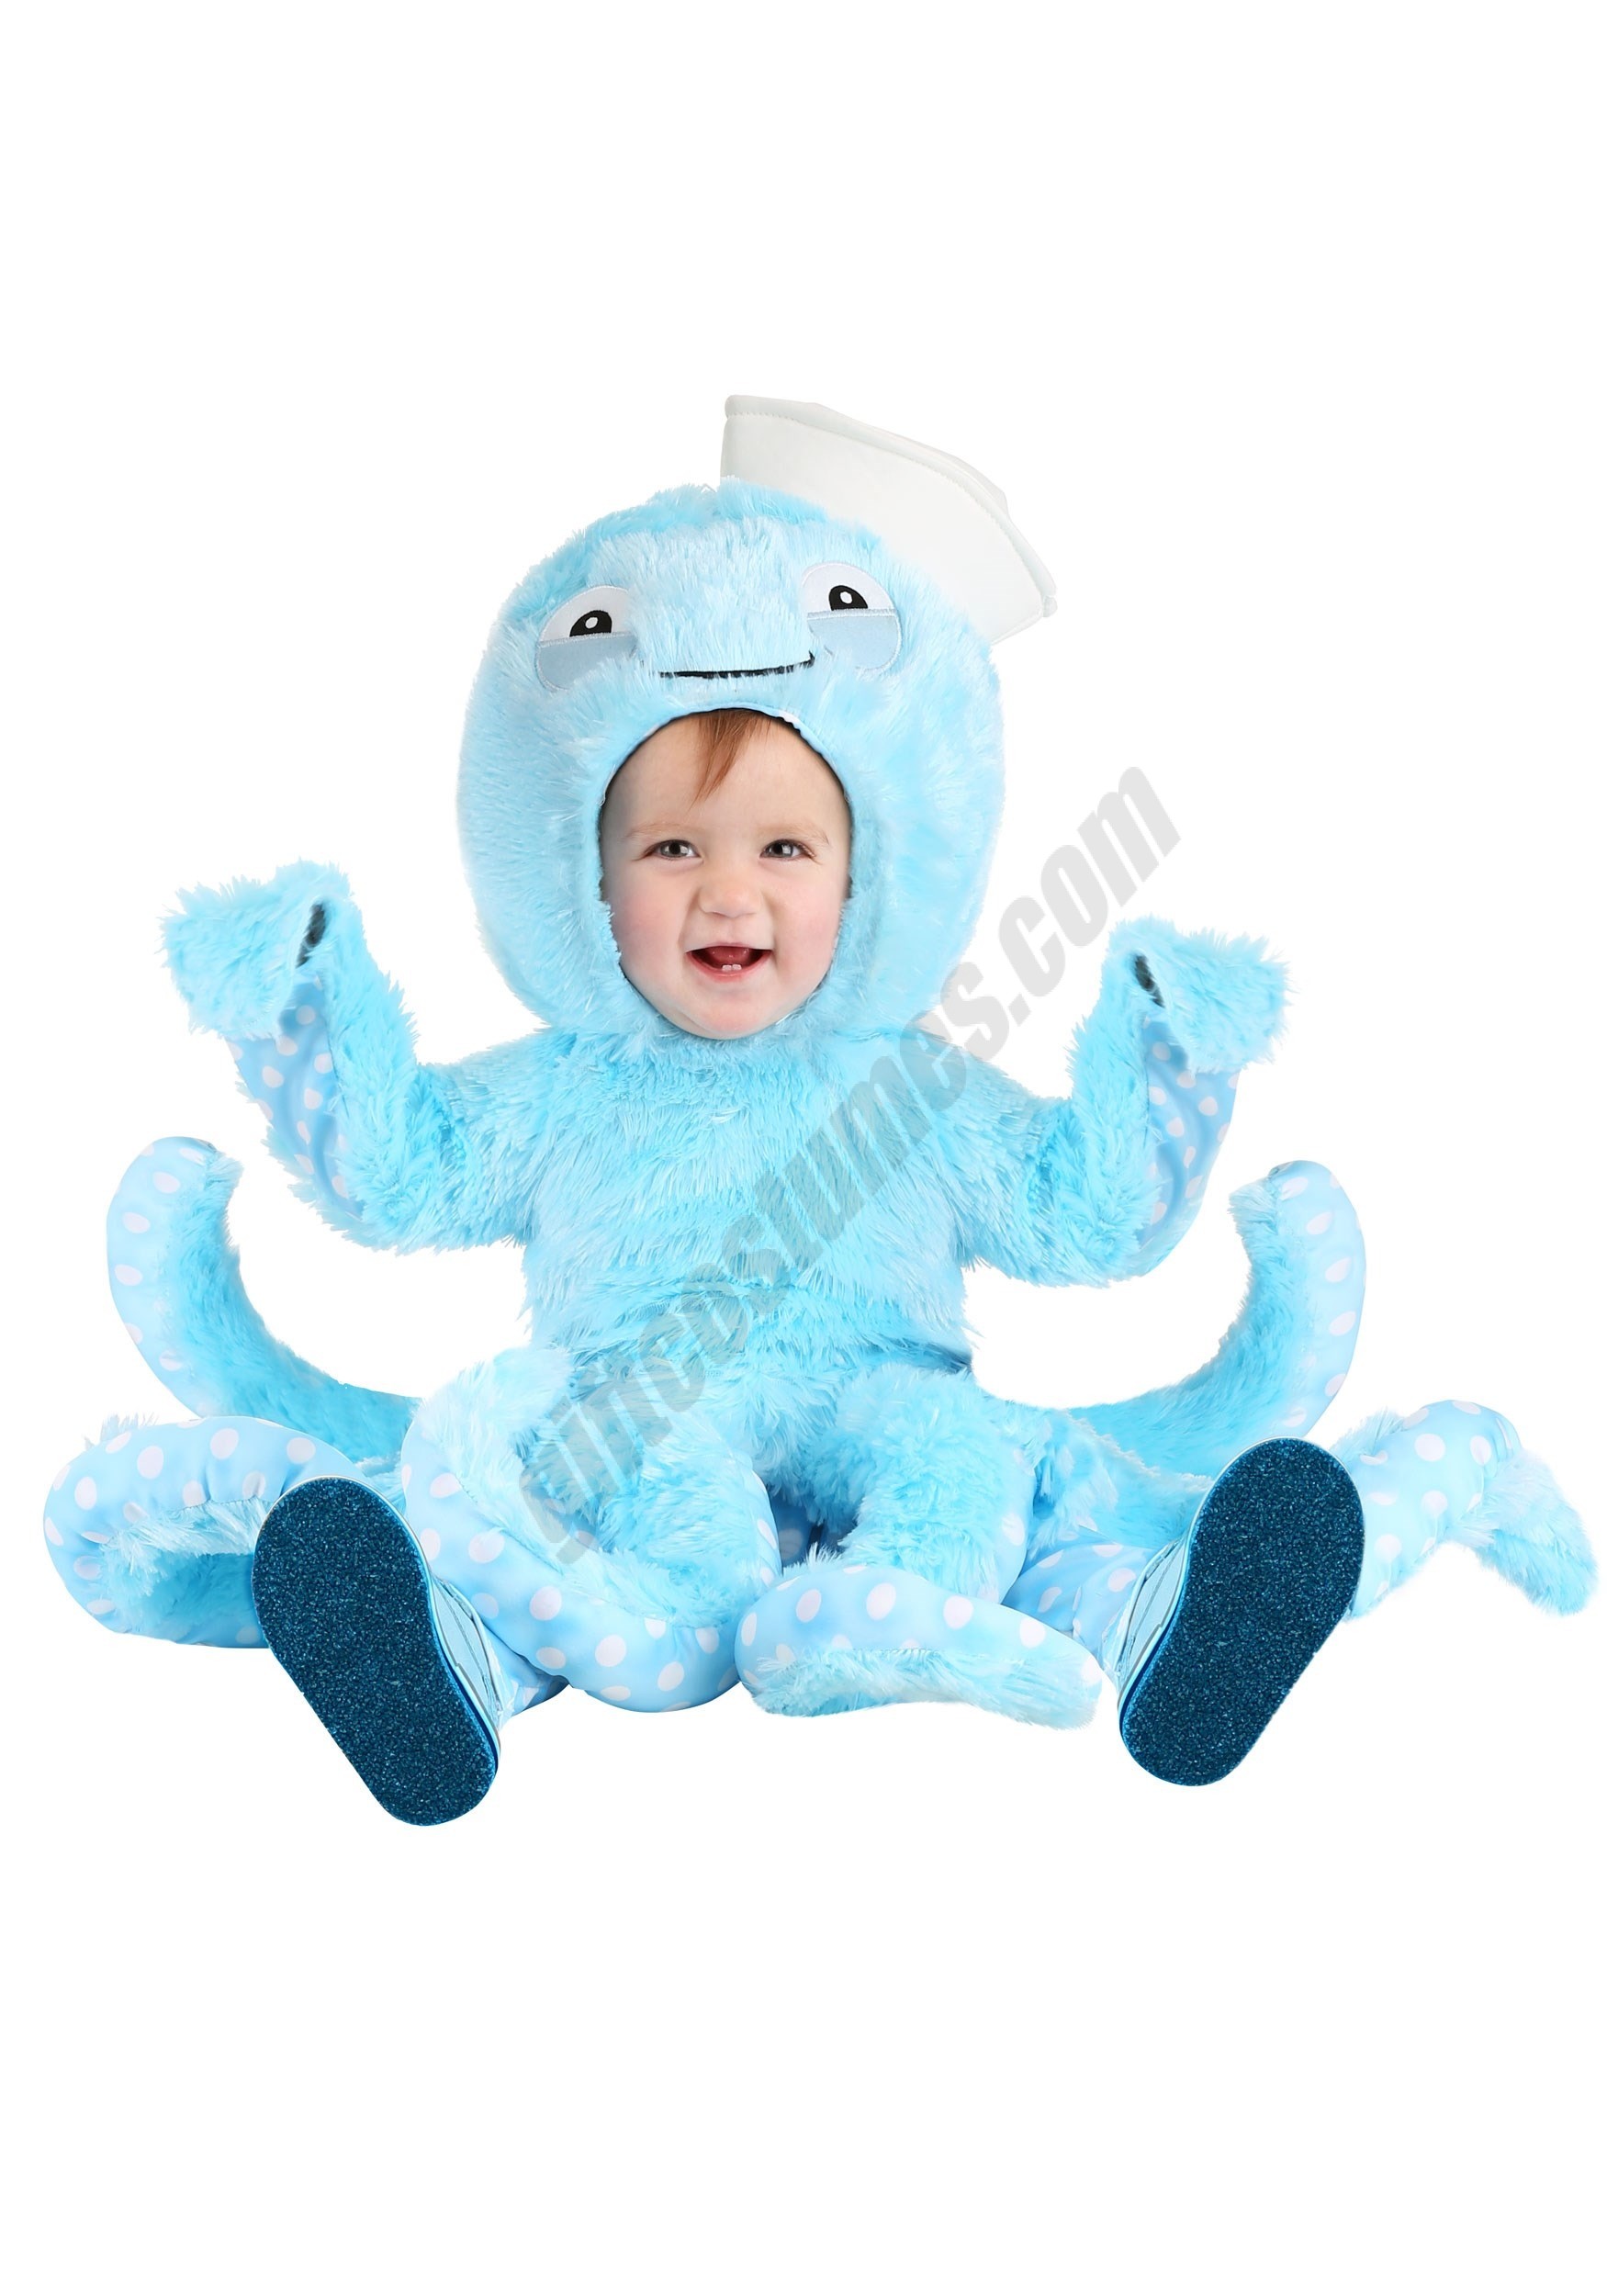 Infant/Toddler Octopus Costume Promotions - Infant/Toddler Octopus Costume Promotions